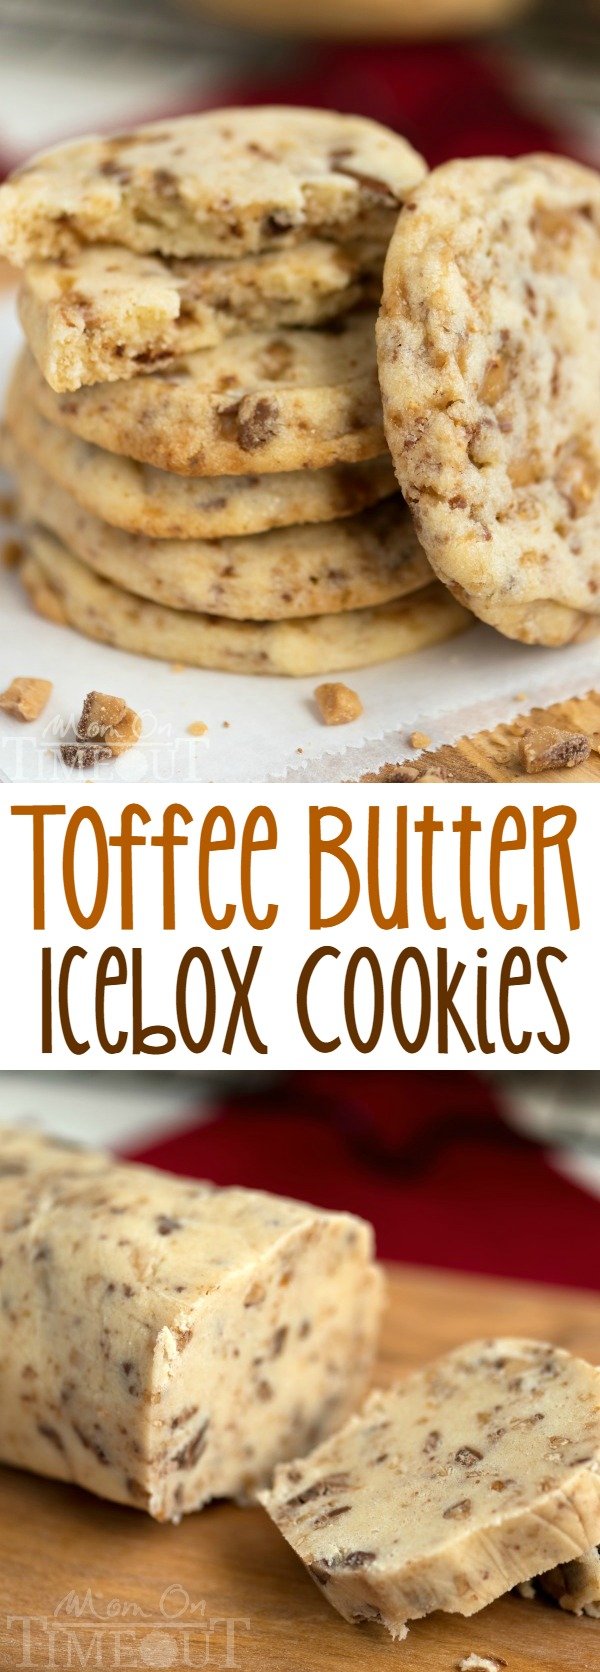 toffee butter icebox cookies collage baked cookies cookie dough sliced